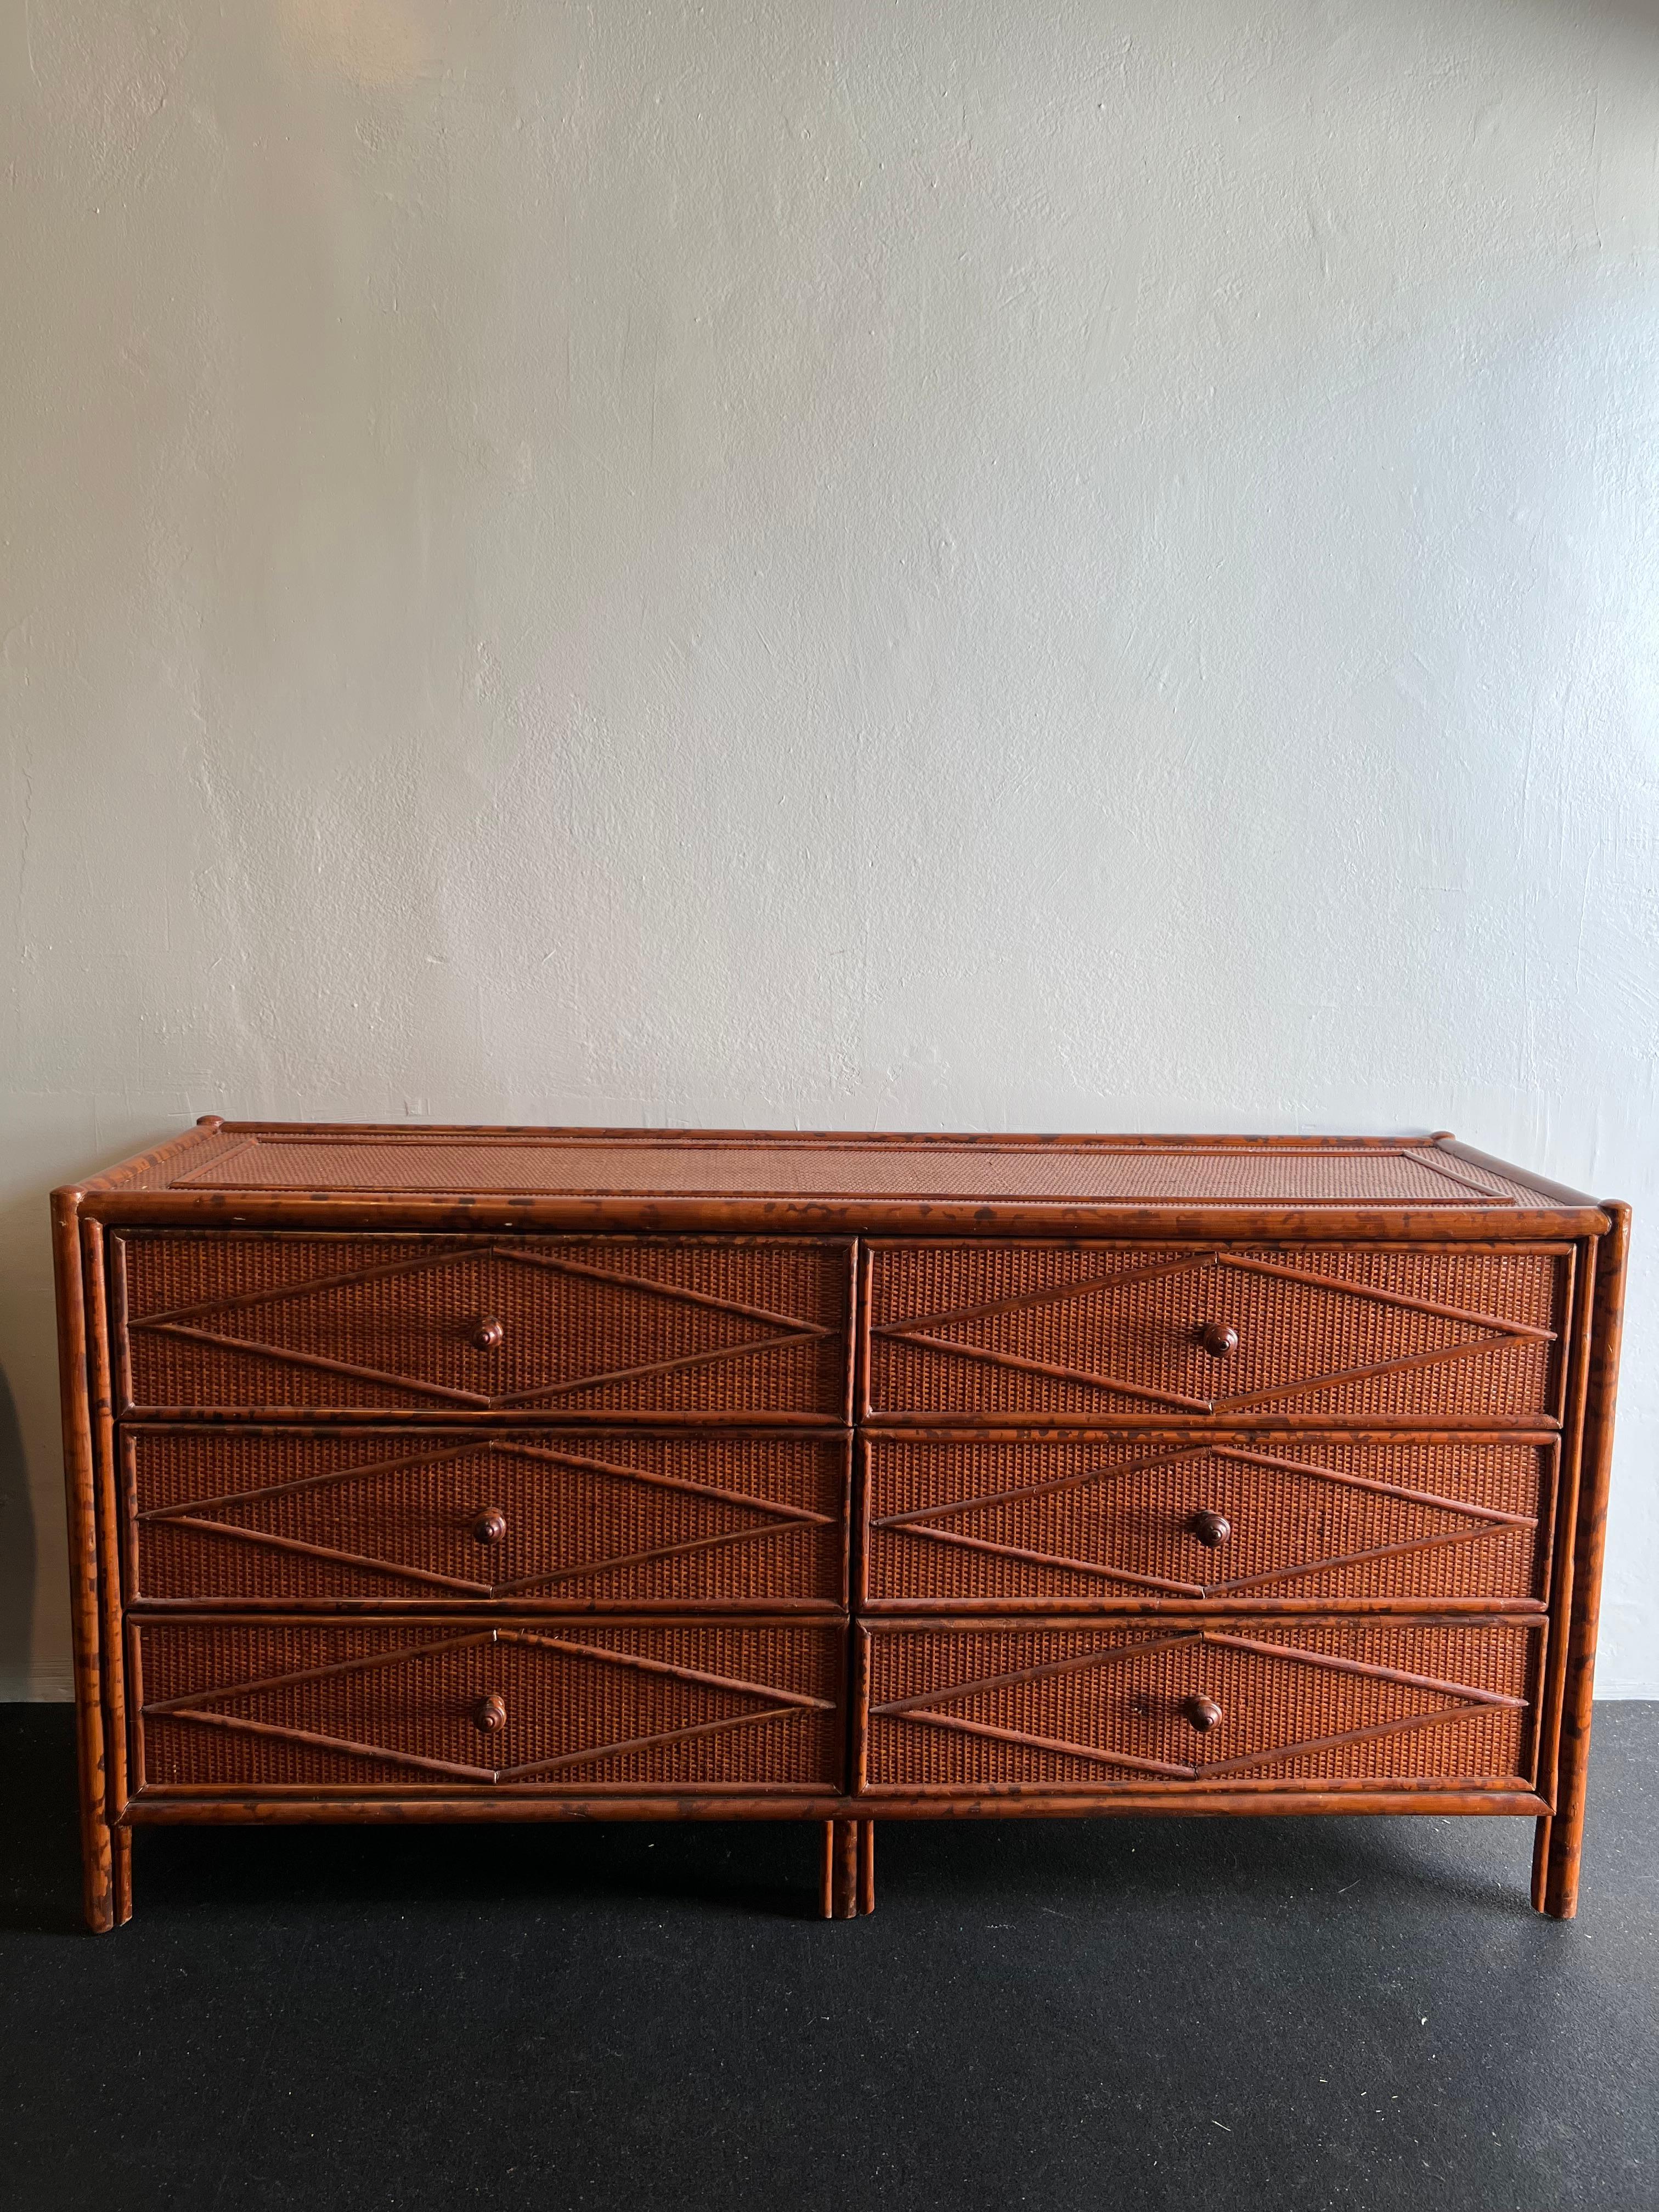 British Colonial Style Burnt Bamboo and Cane Dresser In Good Condition For Sale In West Palm Beach, FL